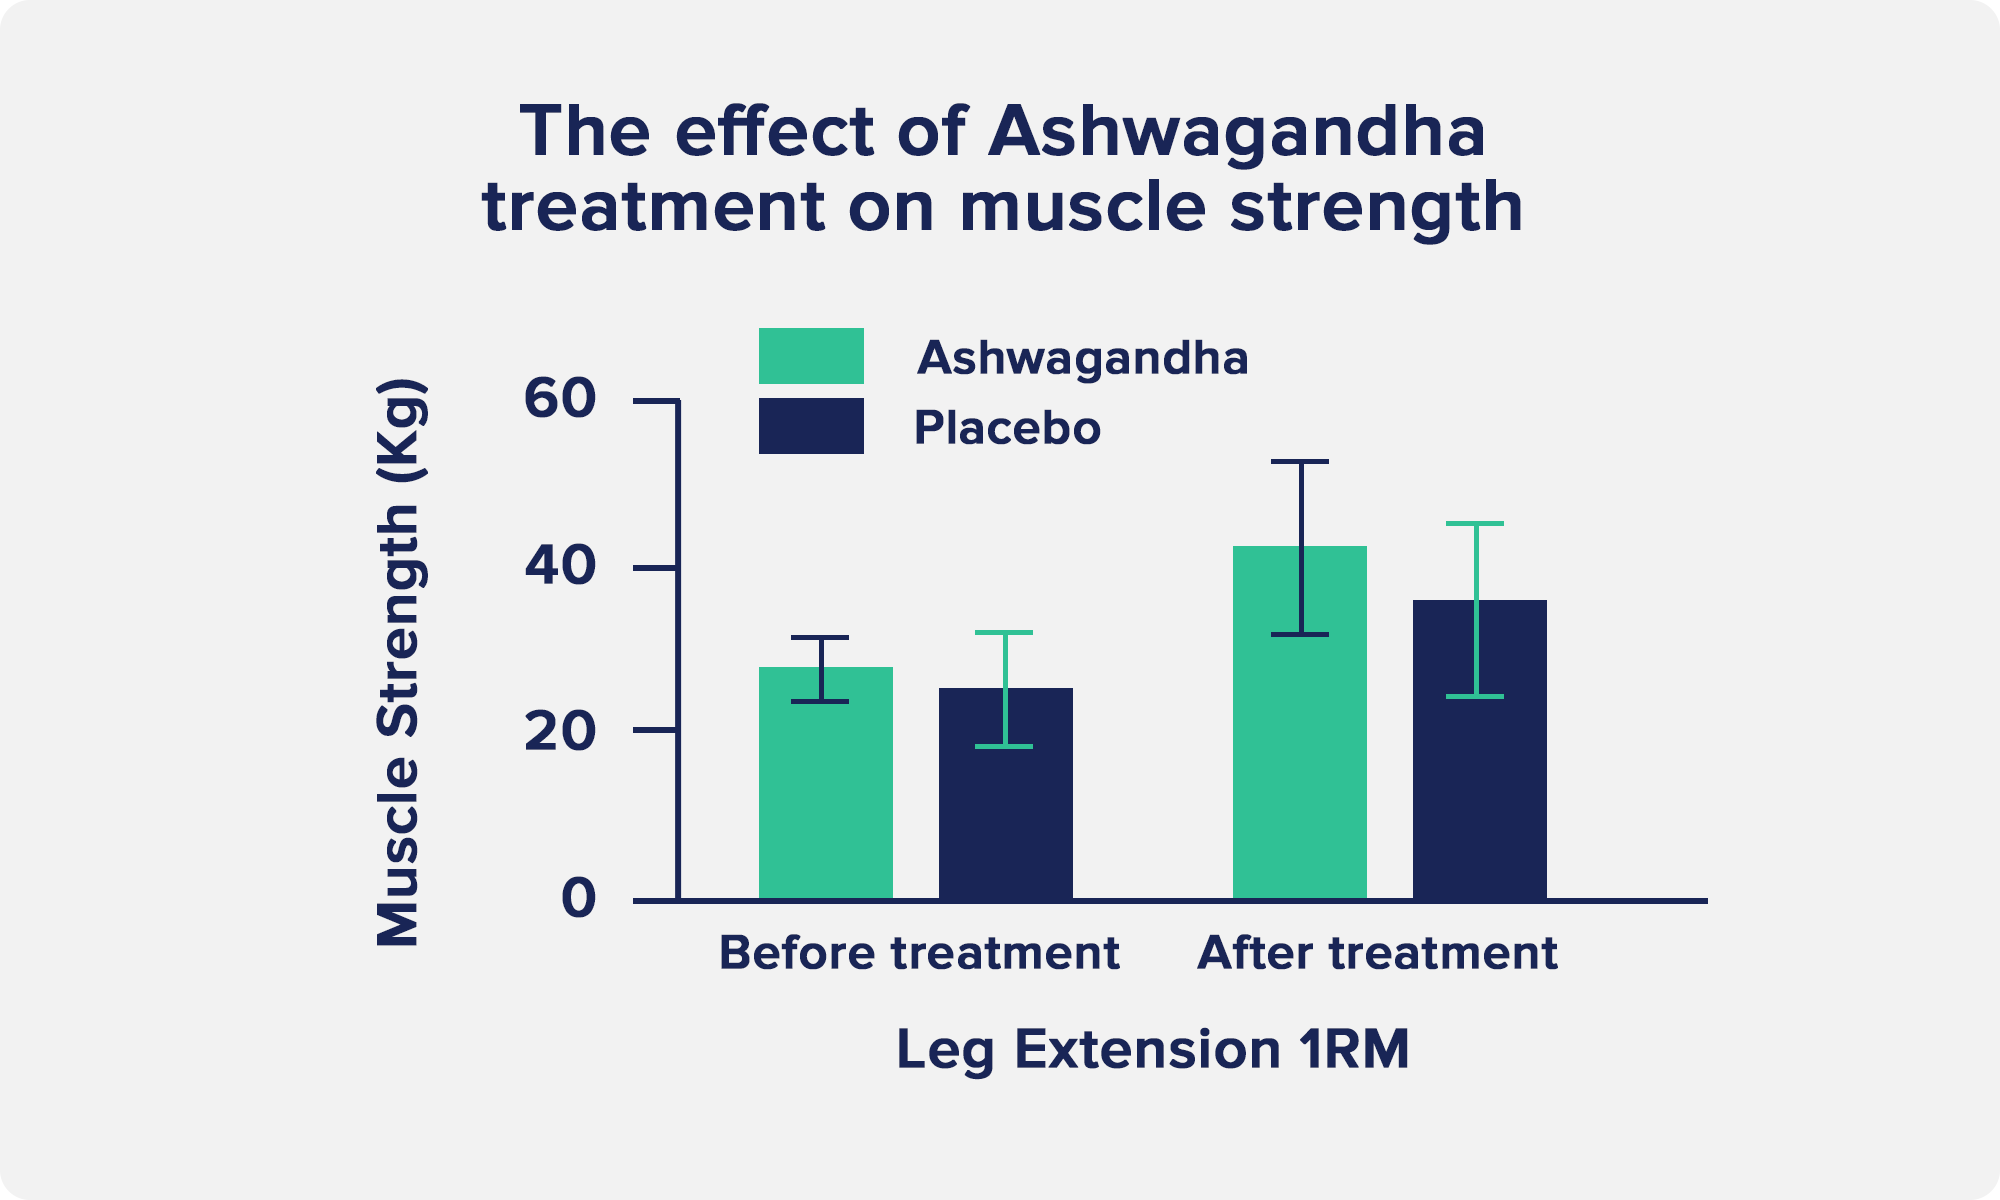 A graph showing the effect of Ashwaganda treatment on muscle strength